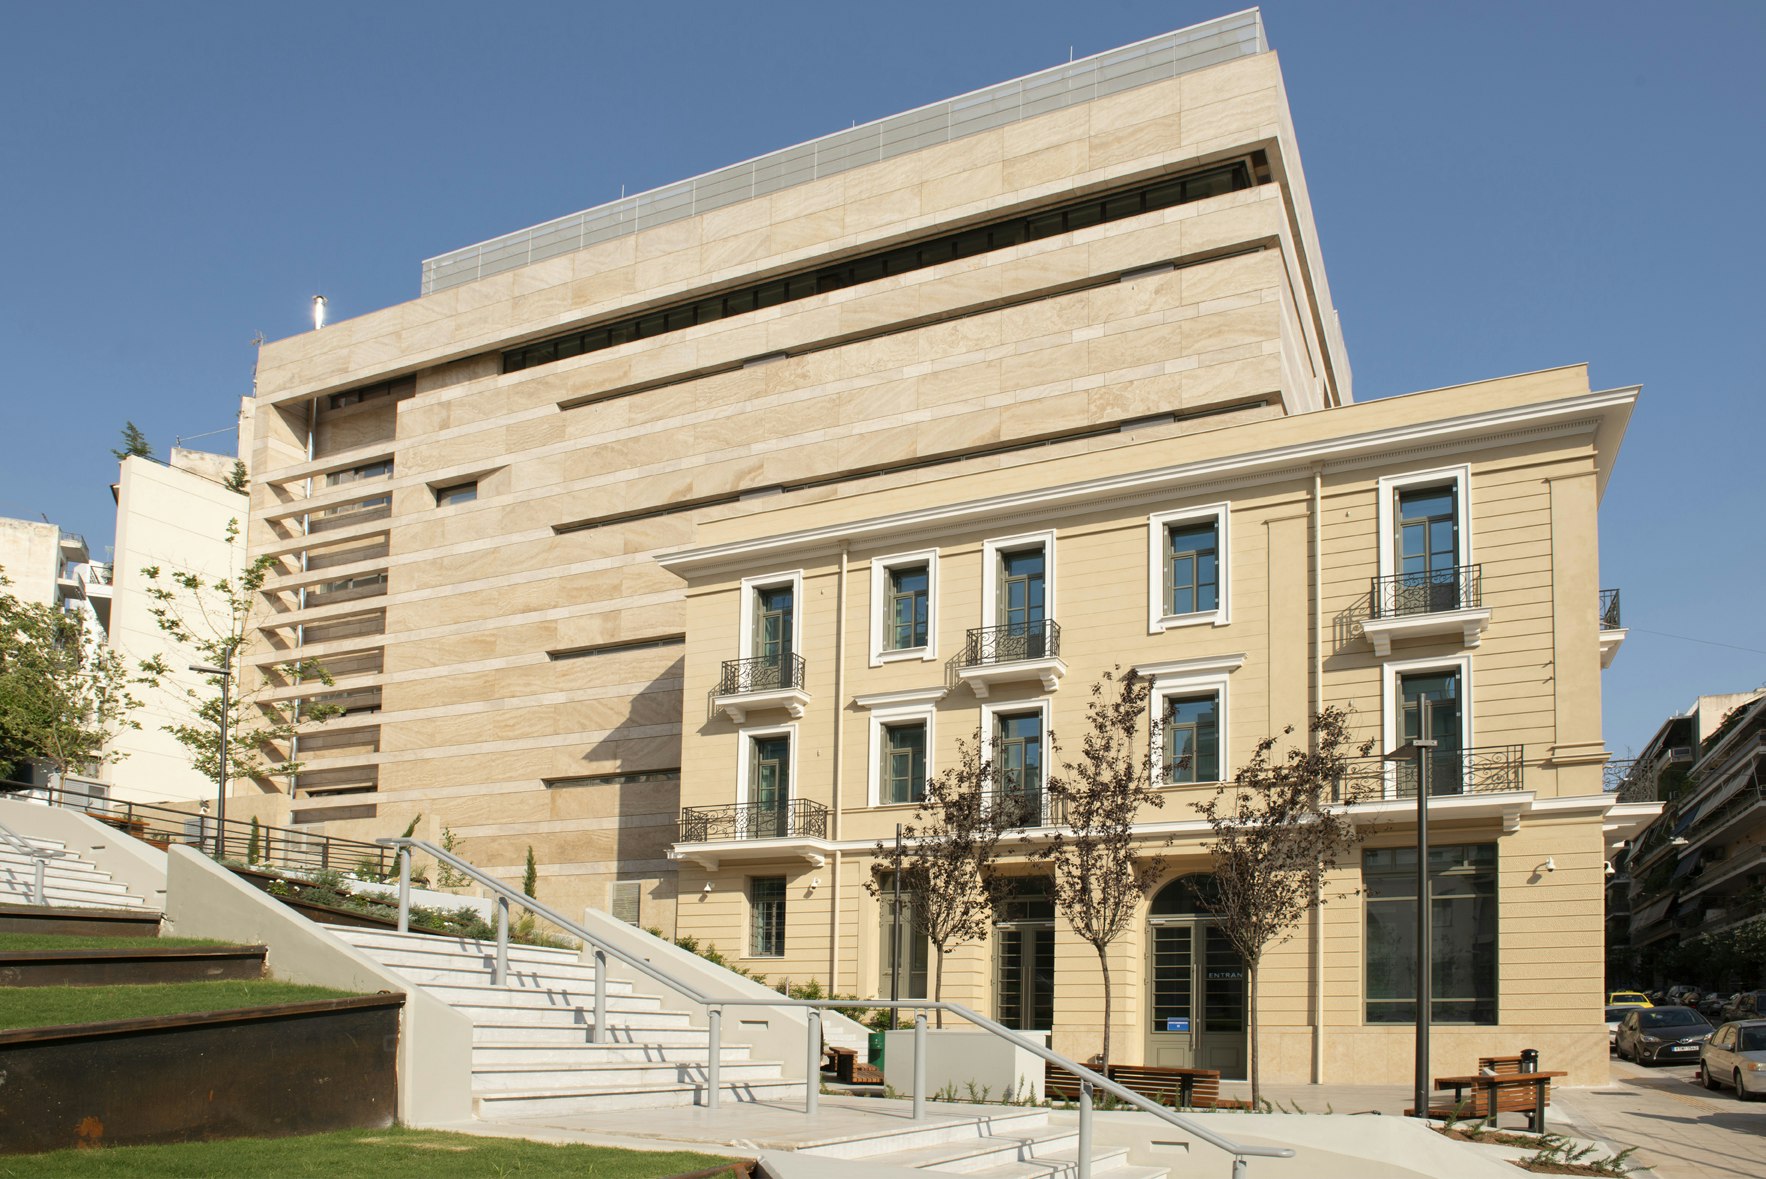 An exterior image of a large modern building with sandstone-coloured brickwork